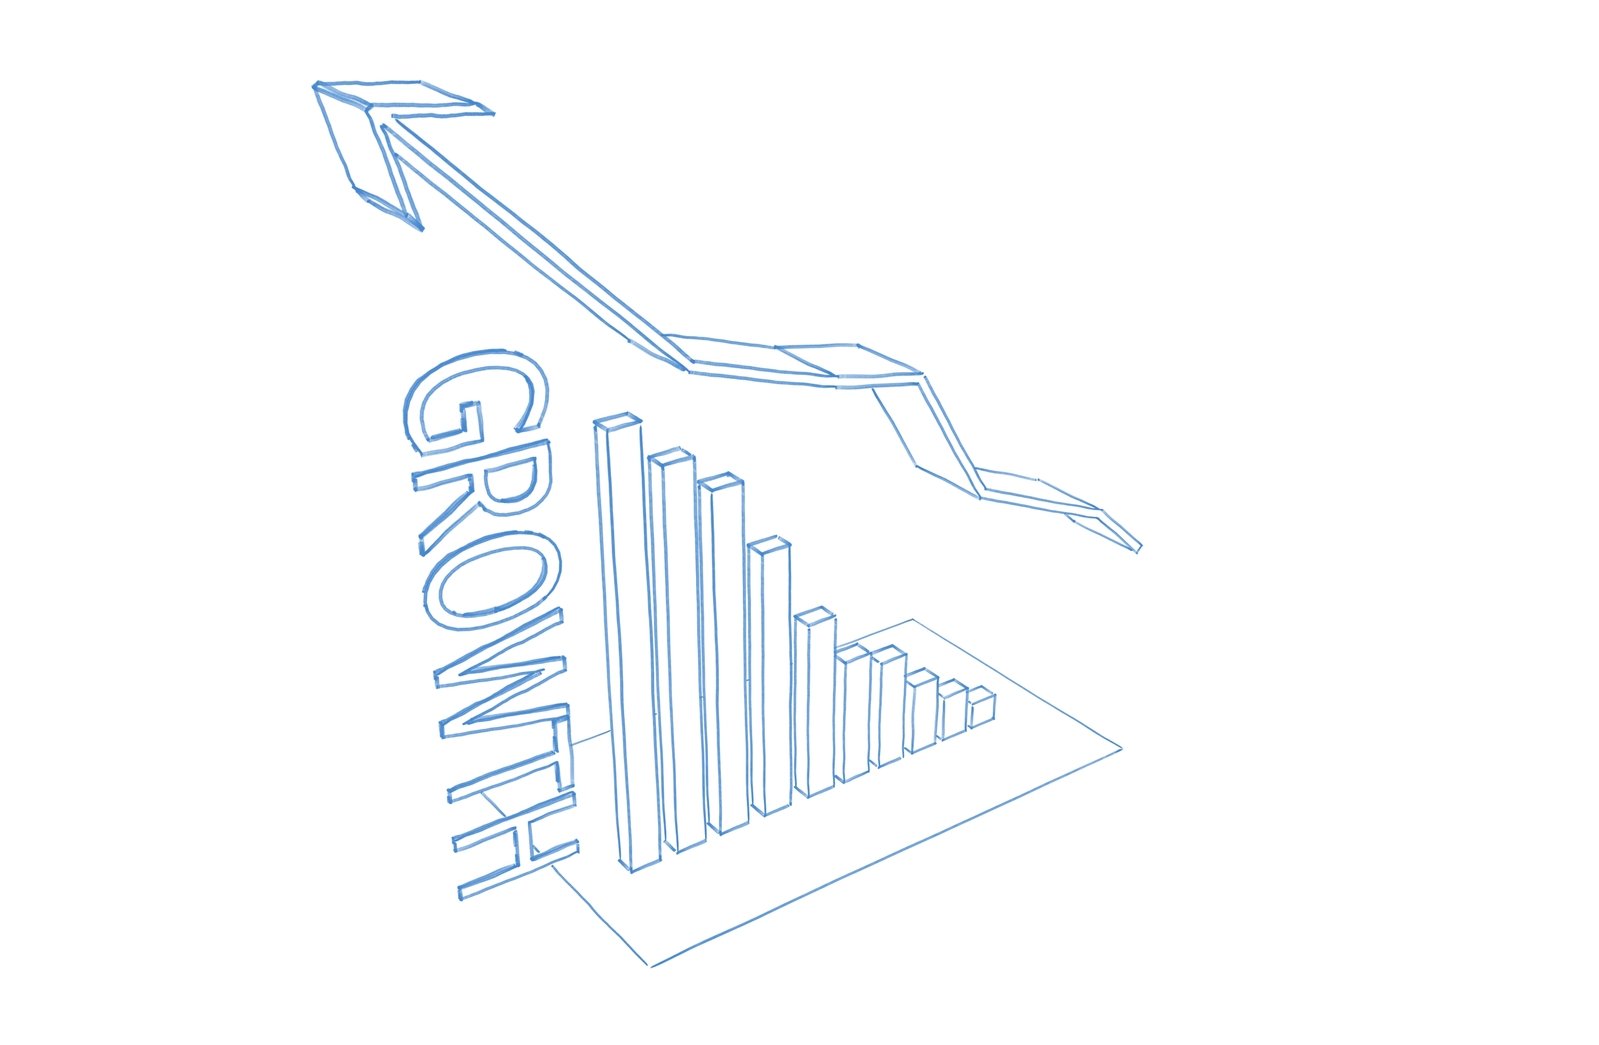 a graphic of an upward graph bar on a white background